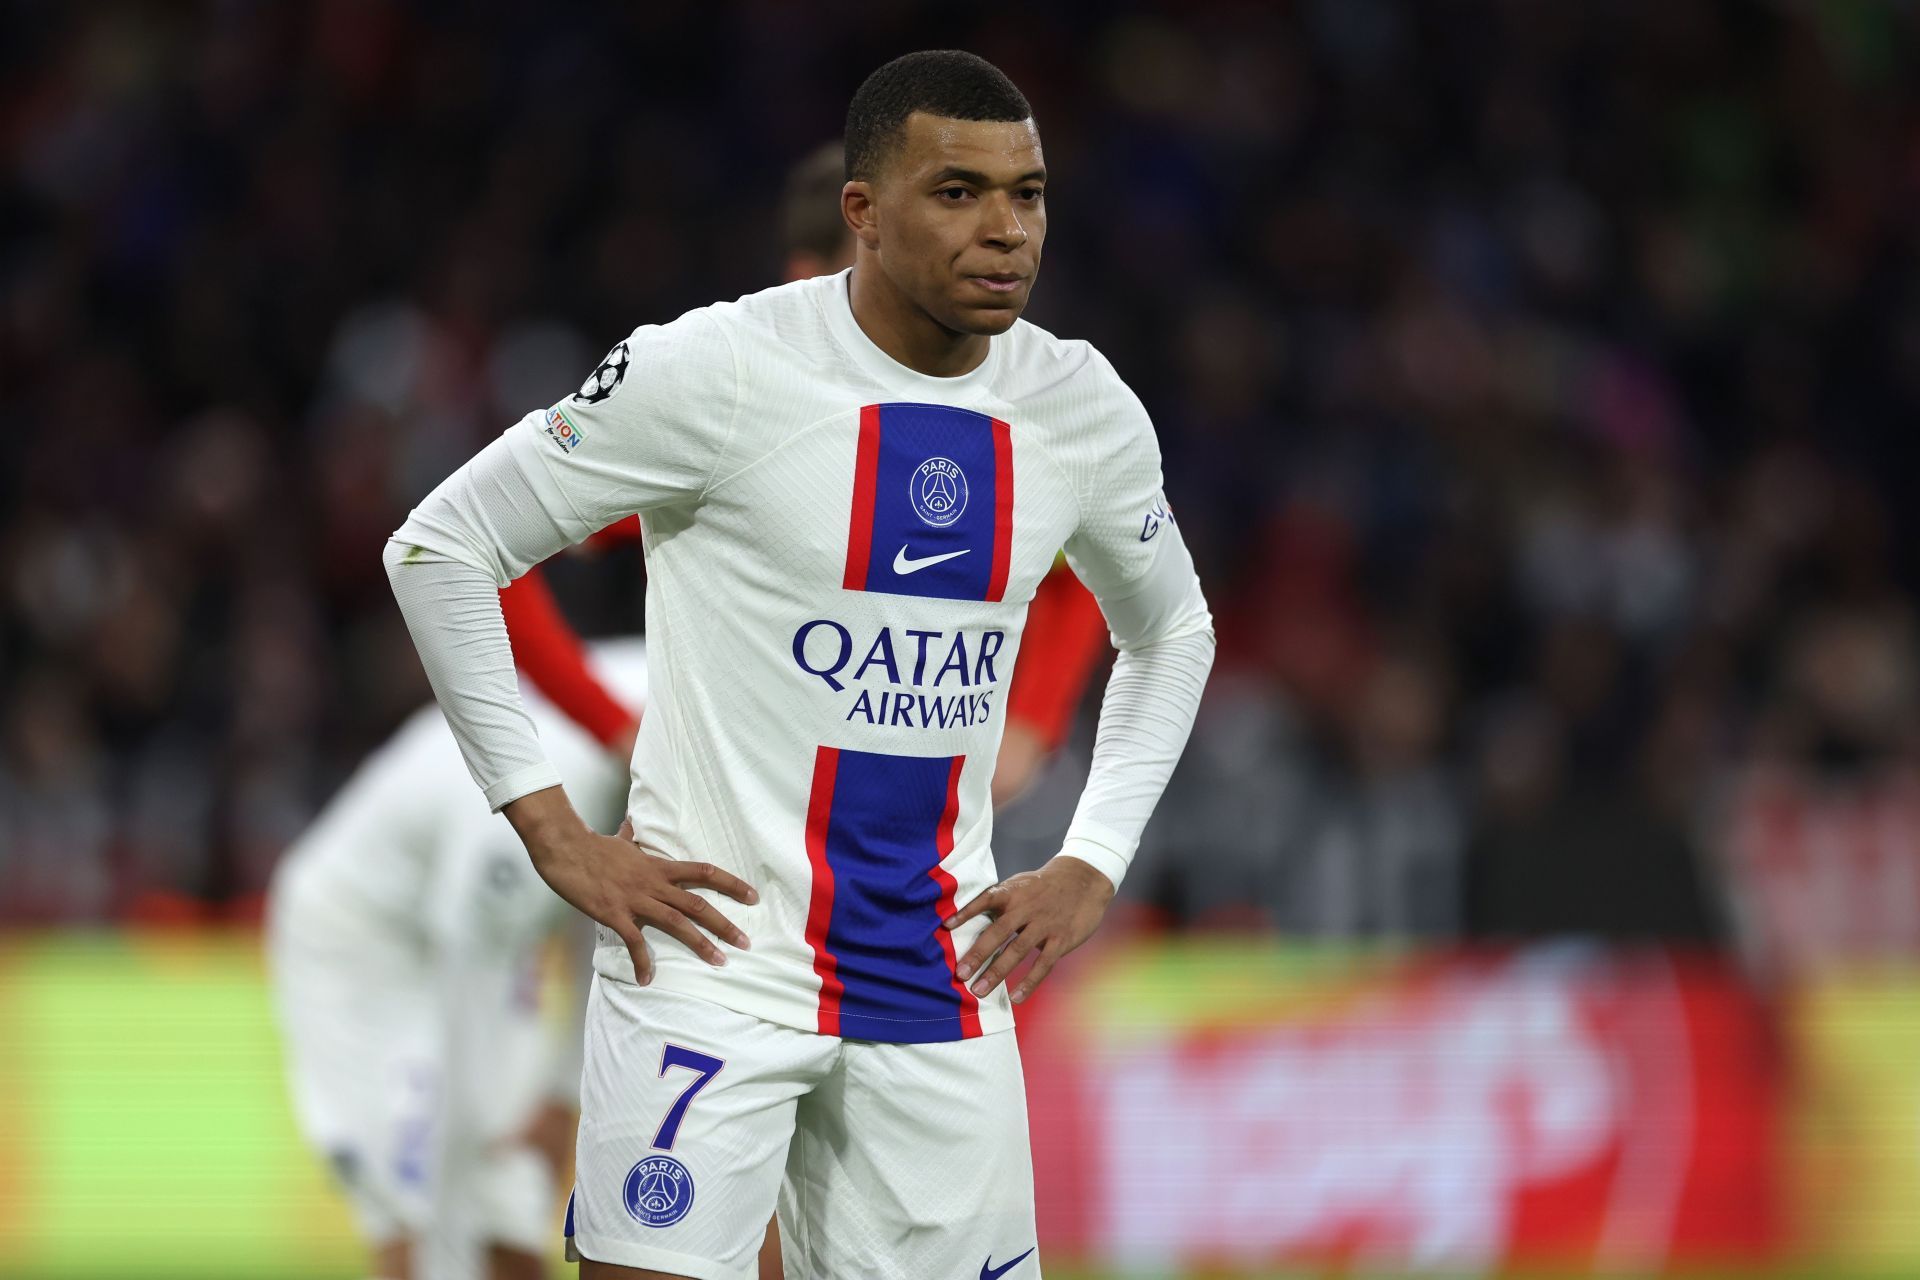 Kylian Mbappe continues to be linked with a move away from the Parc des Princes.